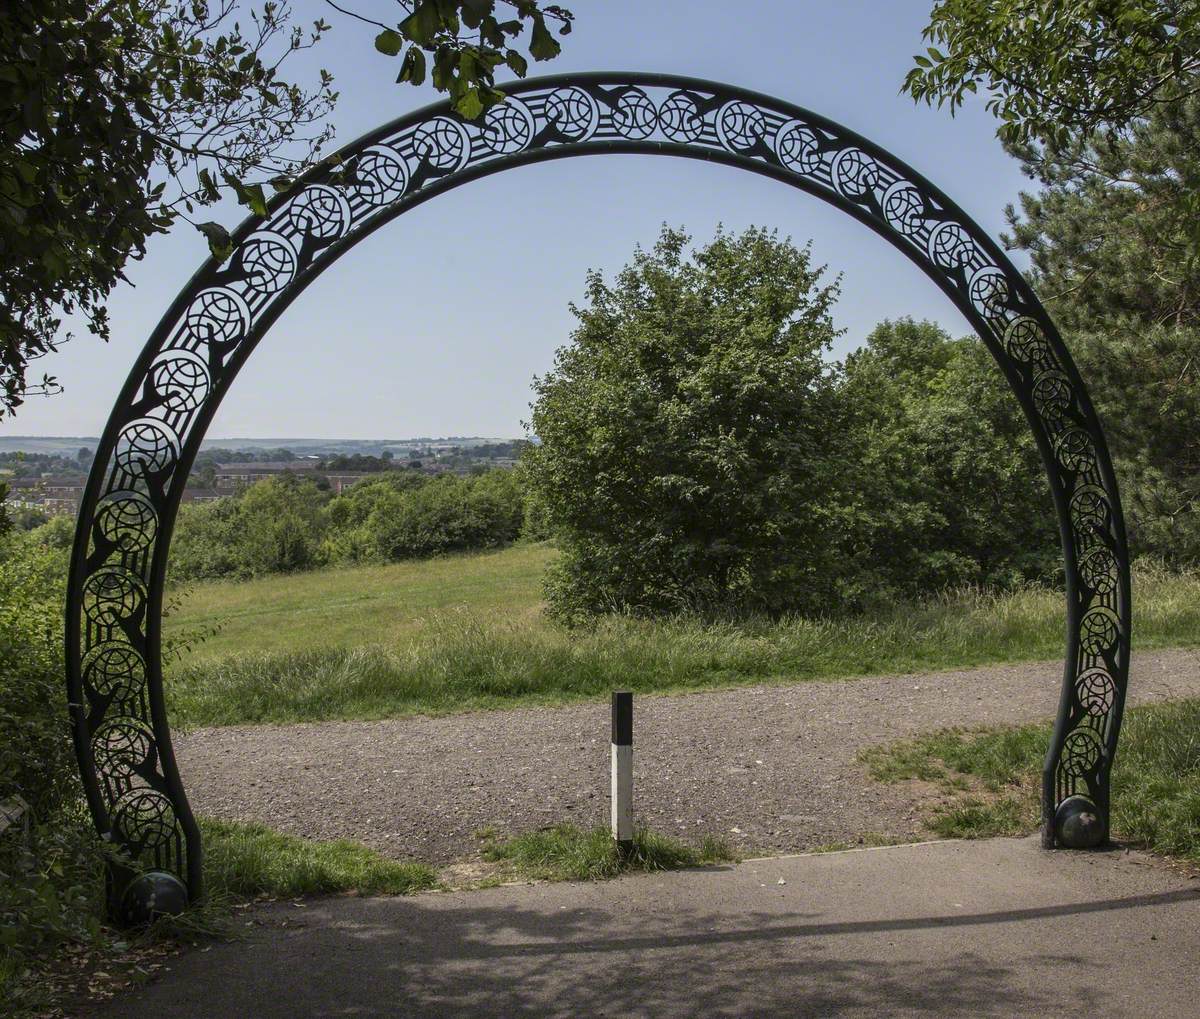 Metal Archway